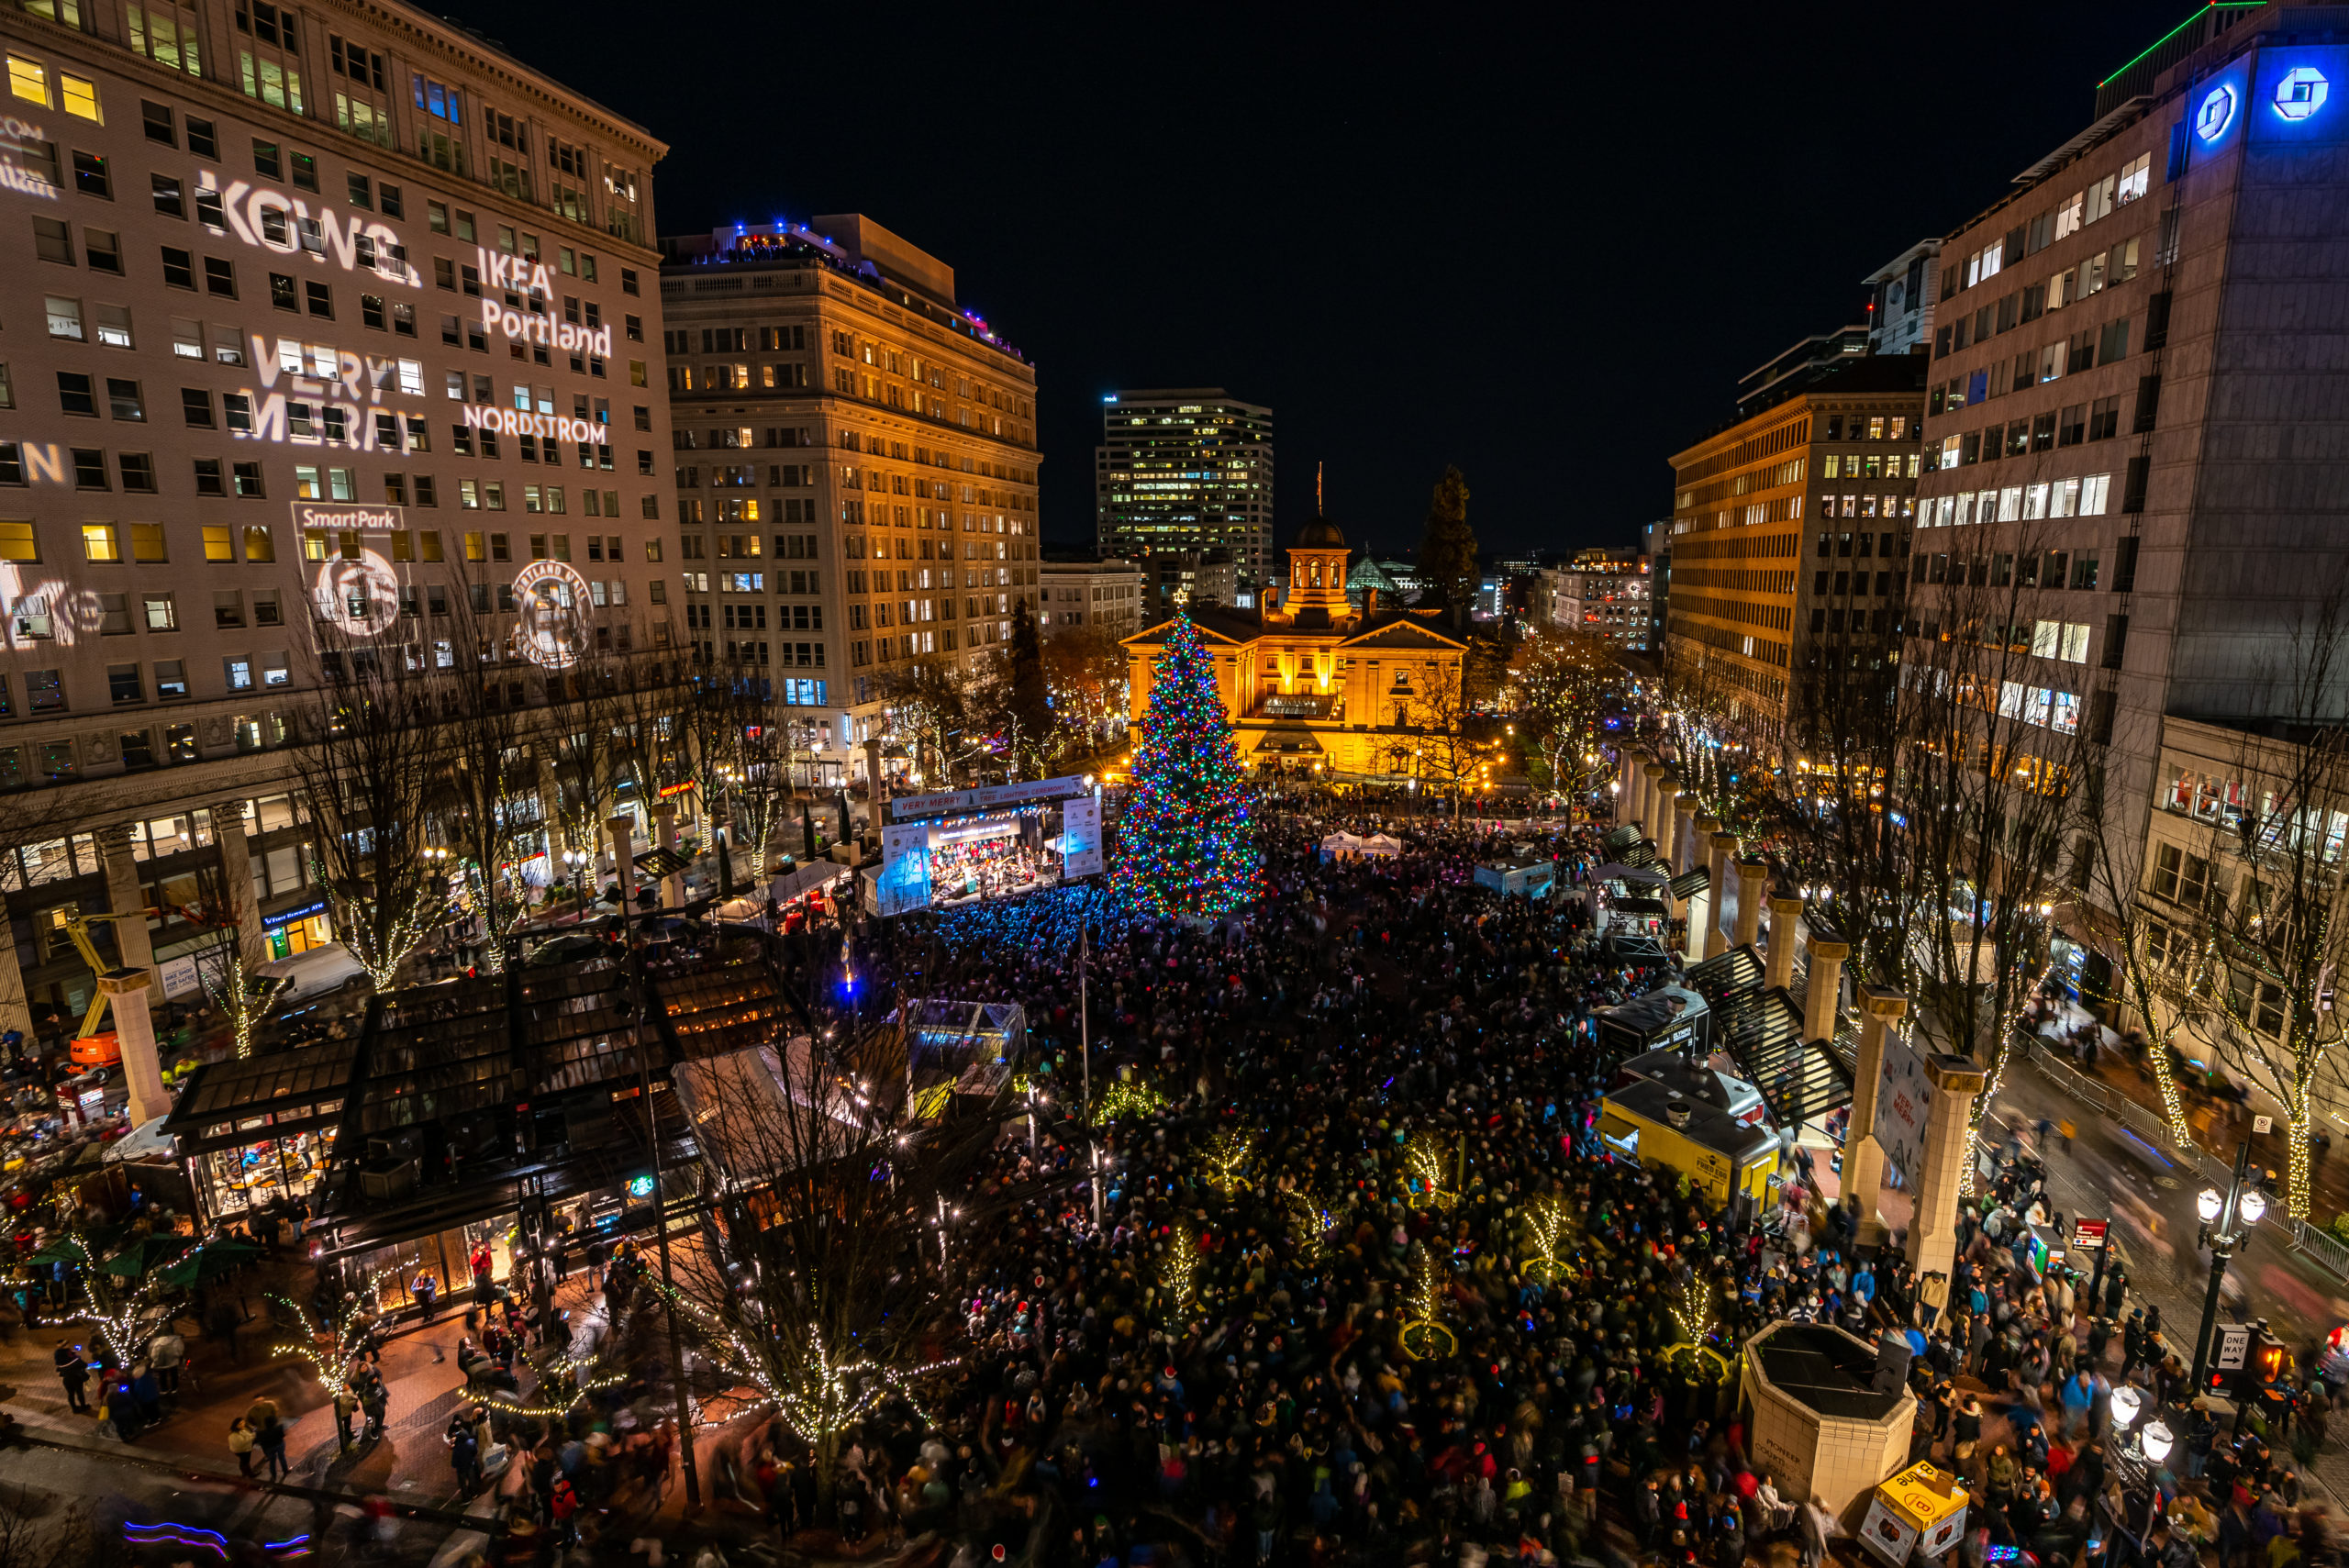 20,000 Community Members Celebrate the 35th Annual Tree Lighting Ceremony!